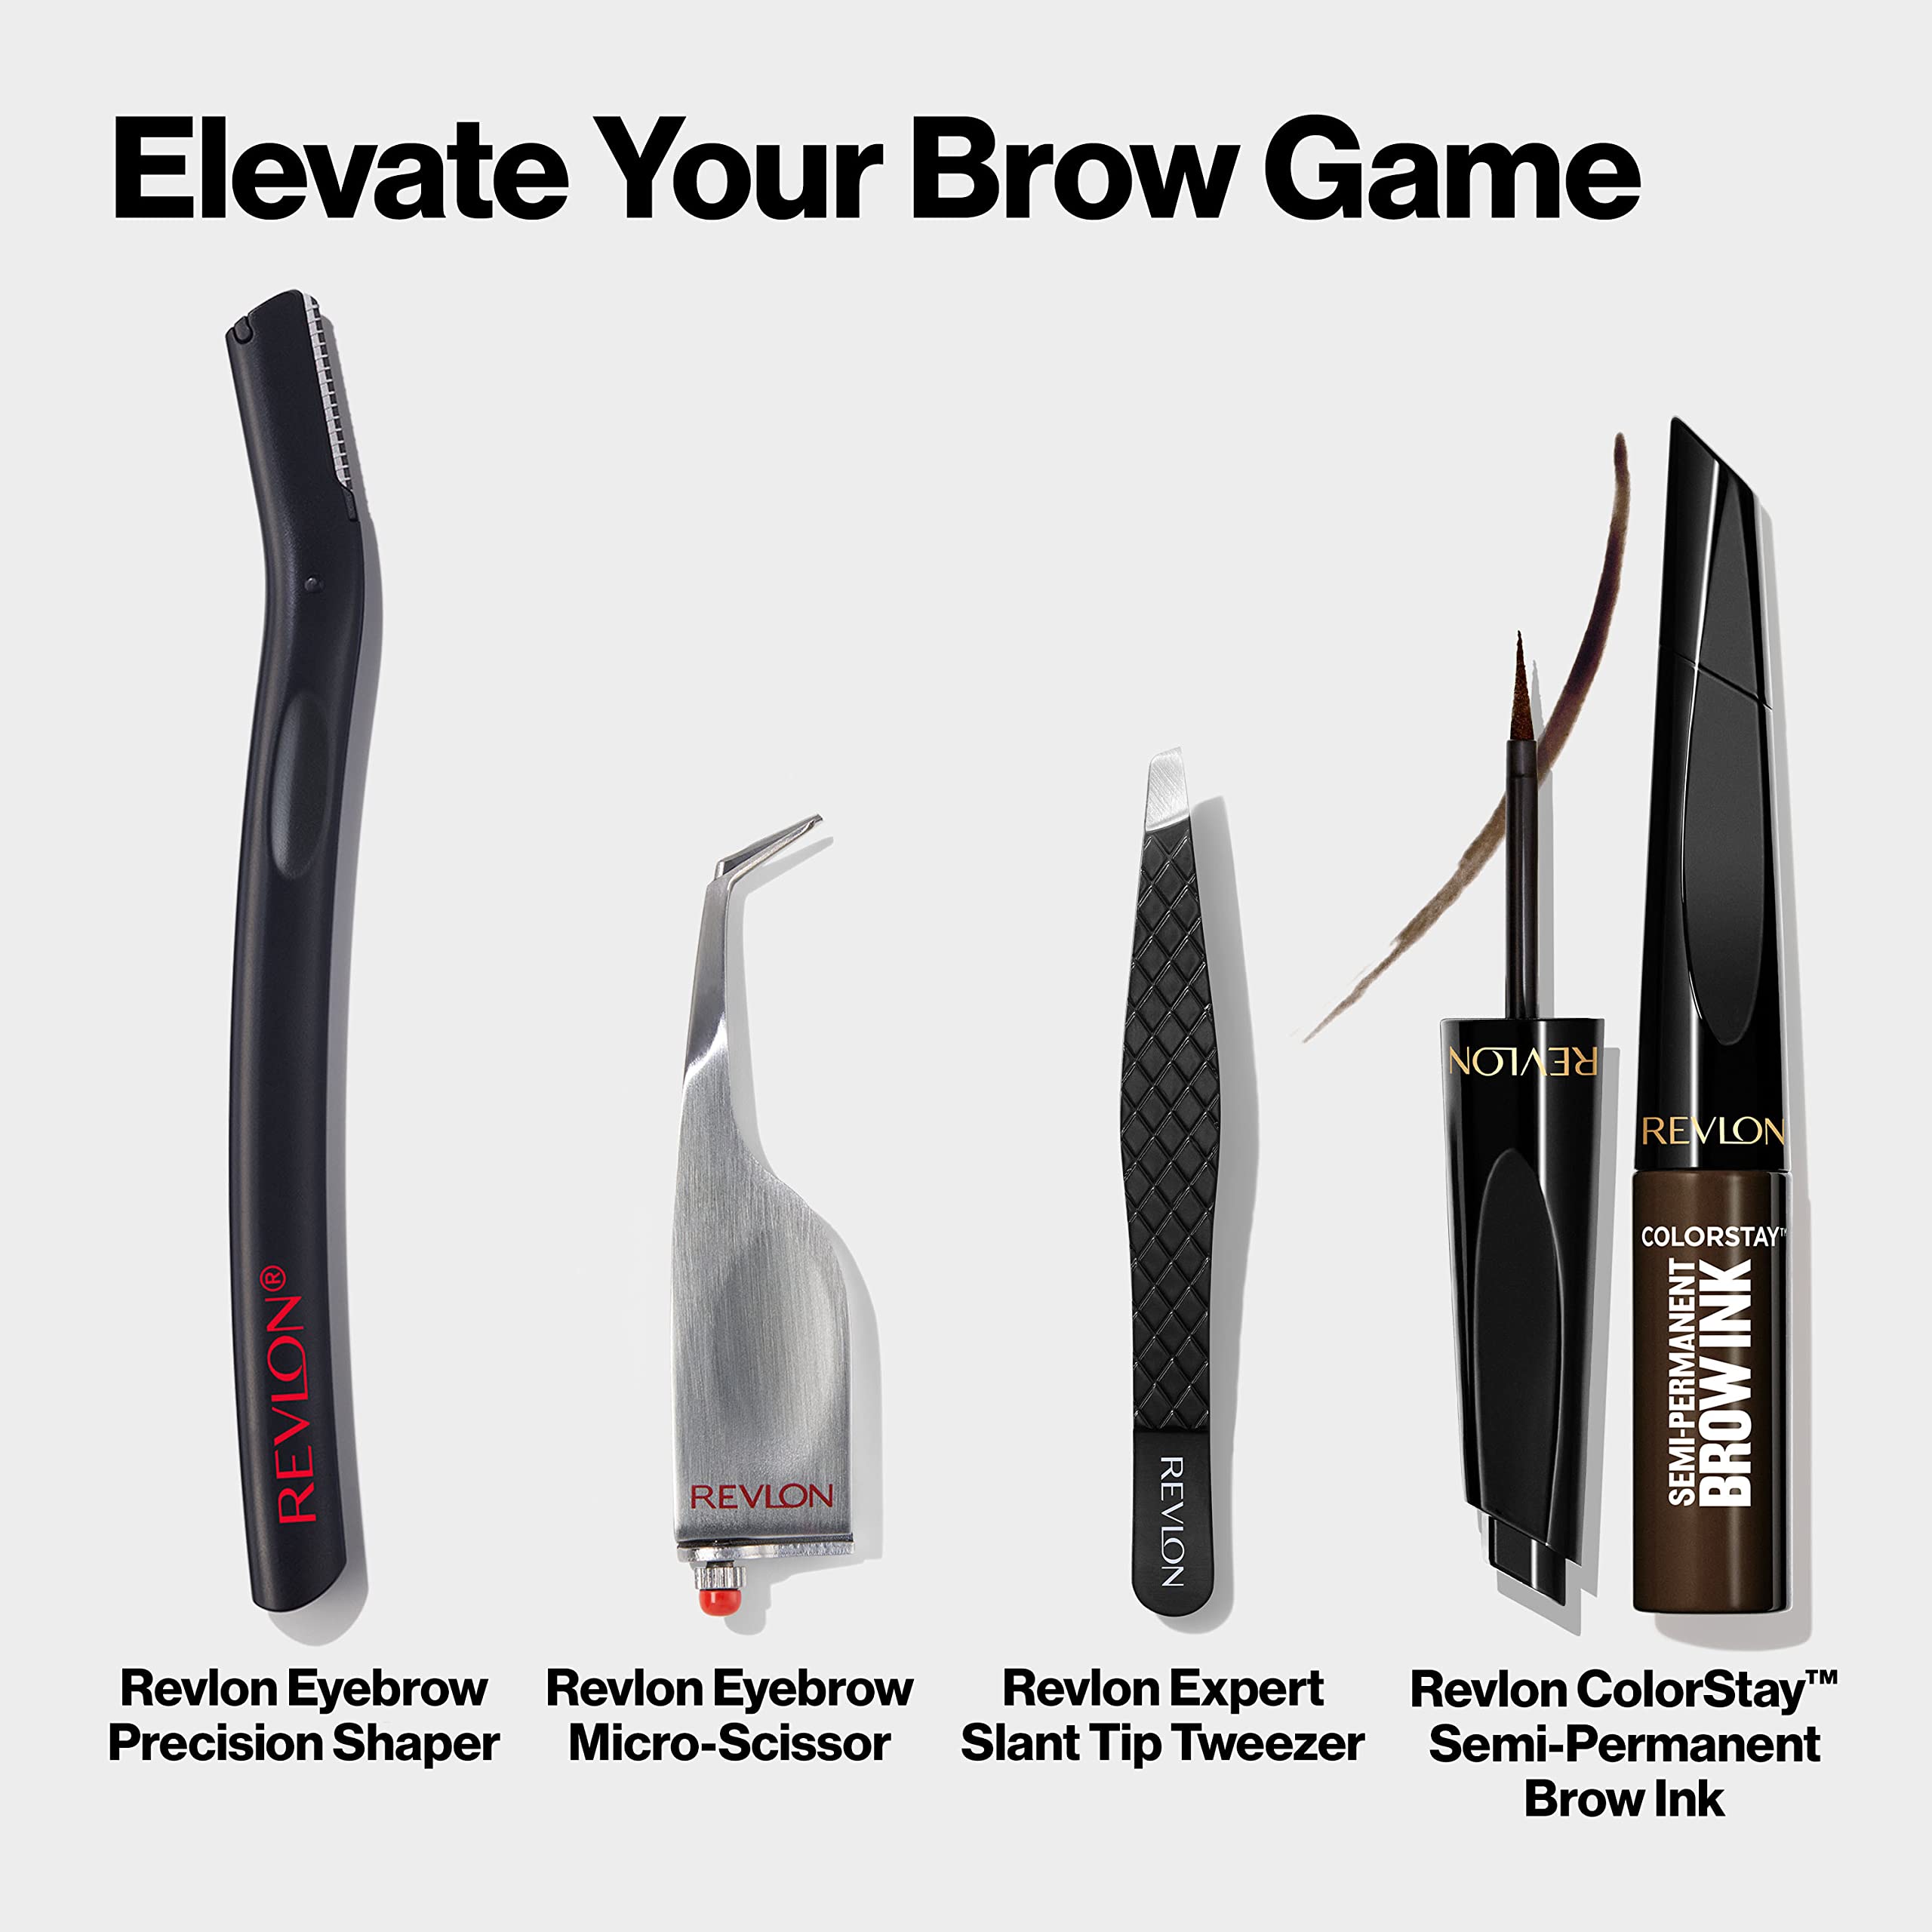 Brow Micro-Scissor, Detailed Eyebrow Shaping with Maximum Control, Stainless Steel Blades for Targeted Trimming, 1 count